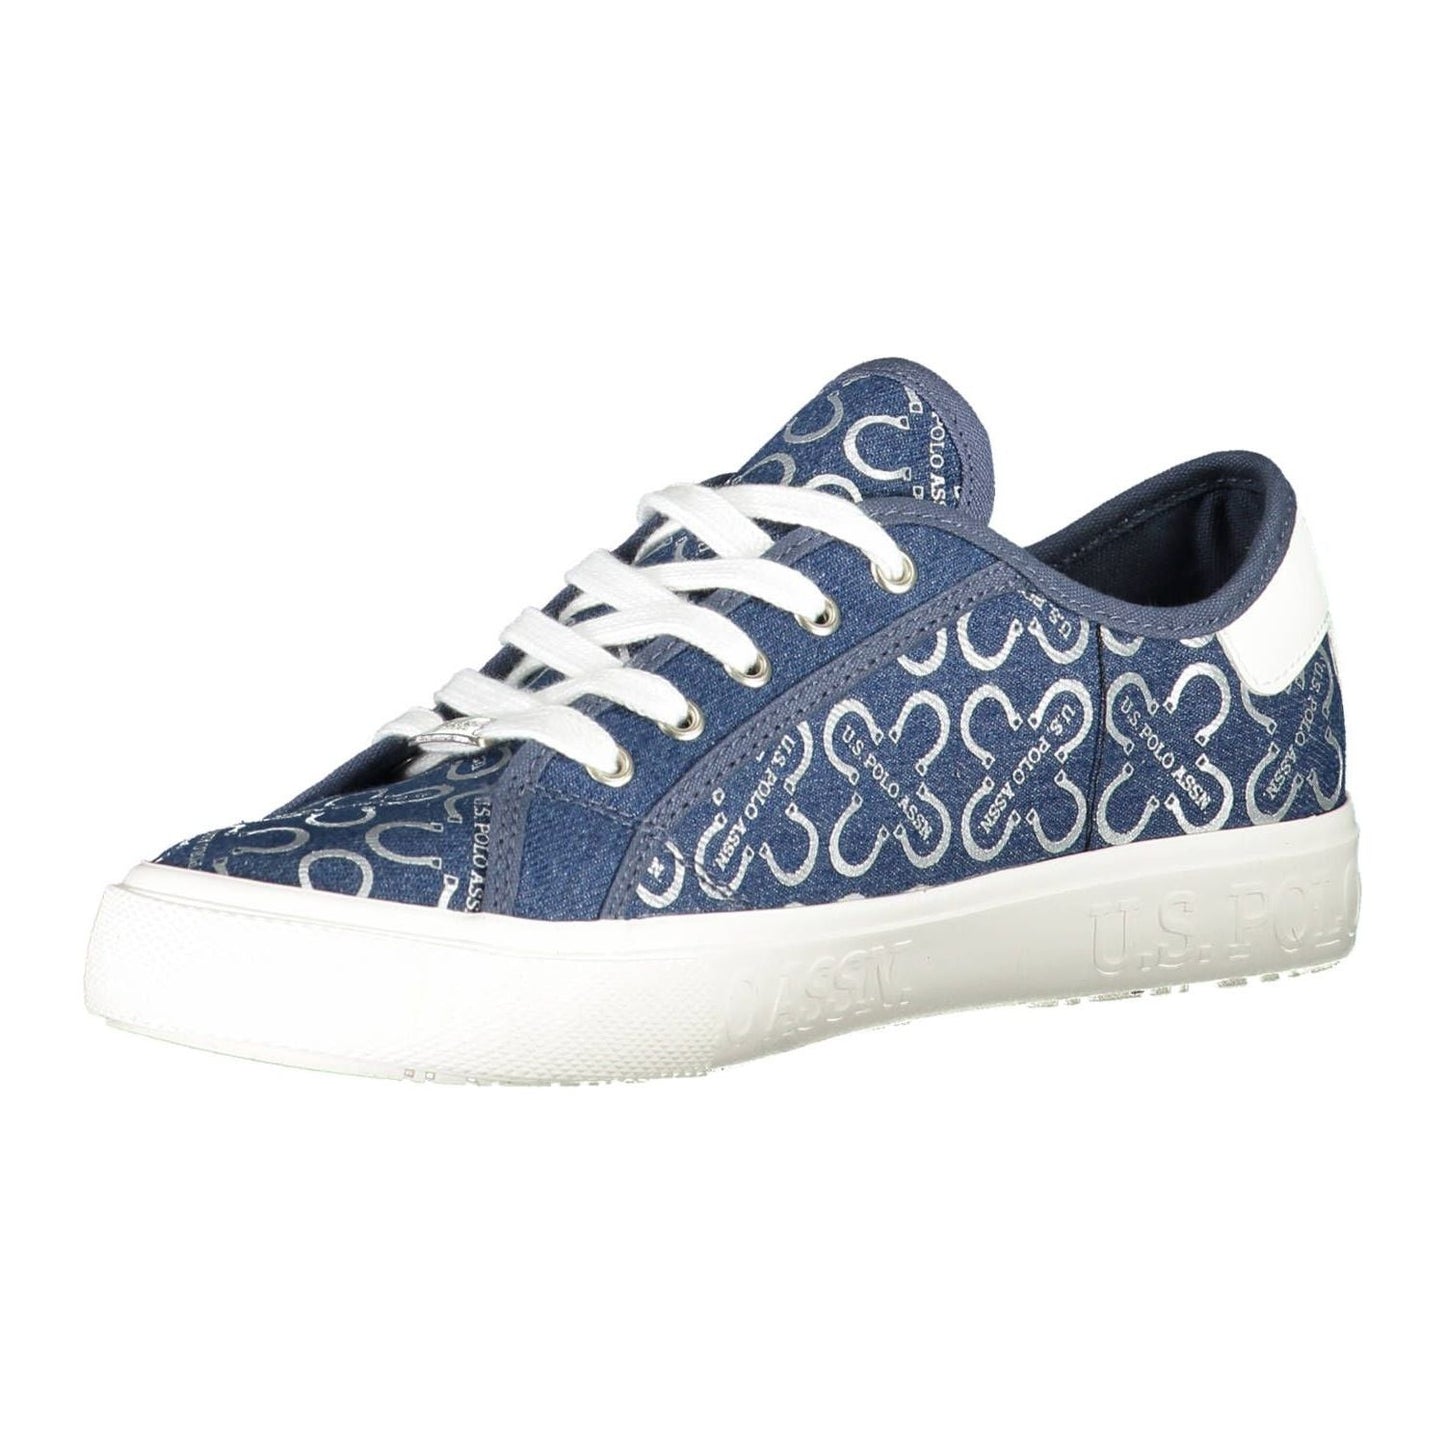 U.S. POLO ASSN. | Chic Blue Lace-Up Sports Sneakers| McRichard Designer Brands   